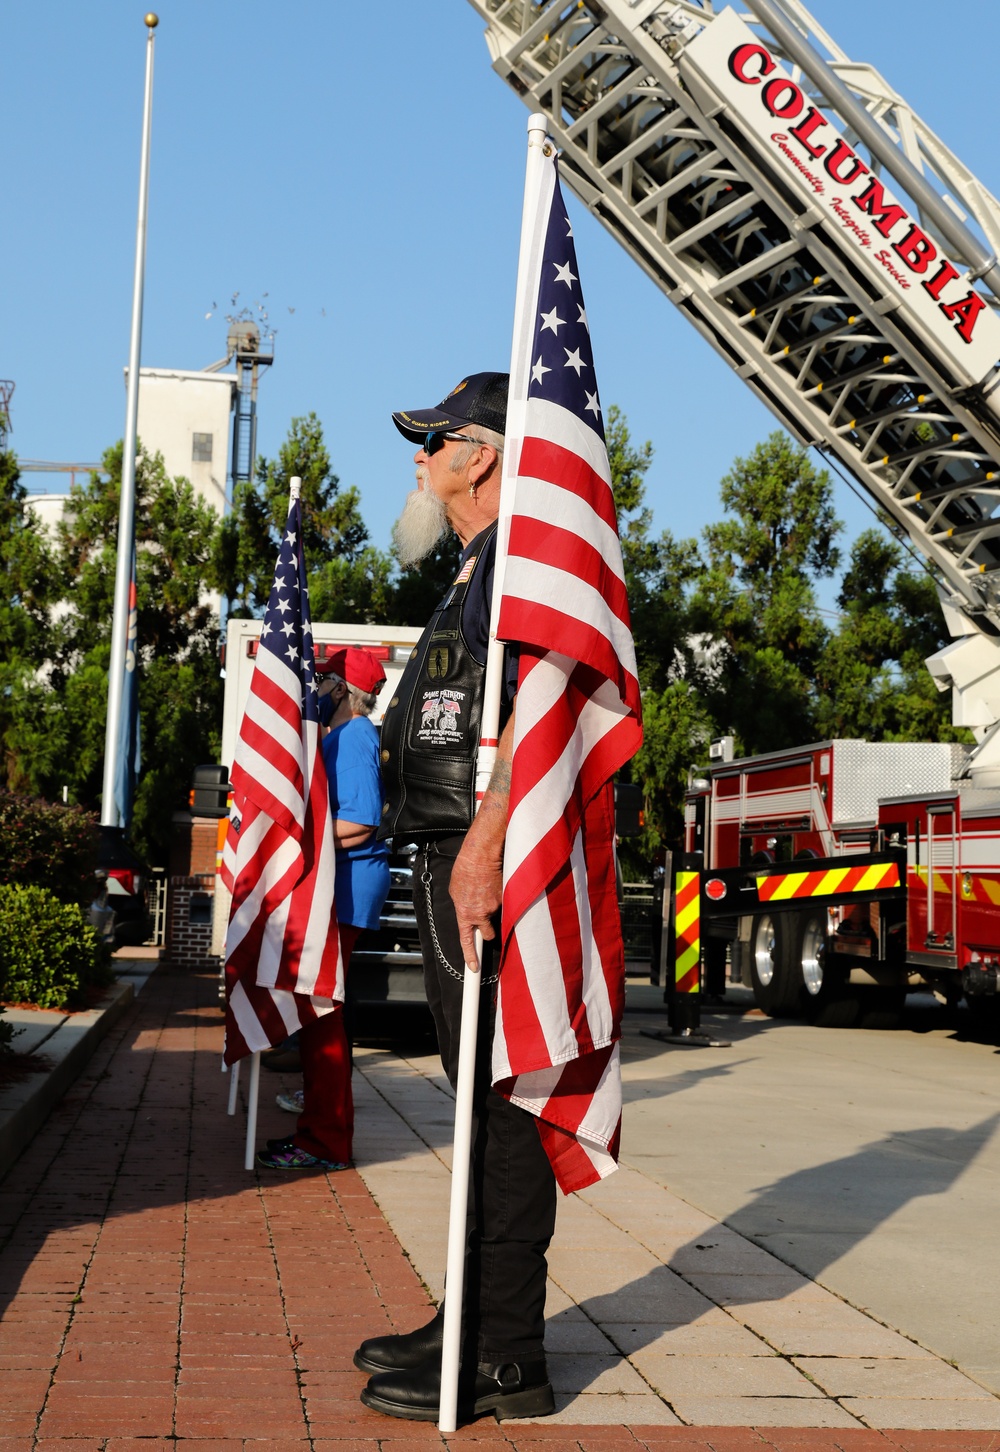 South Carolina National Guard recognizes 20th anniversary of September 11th